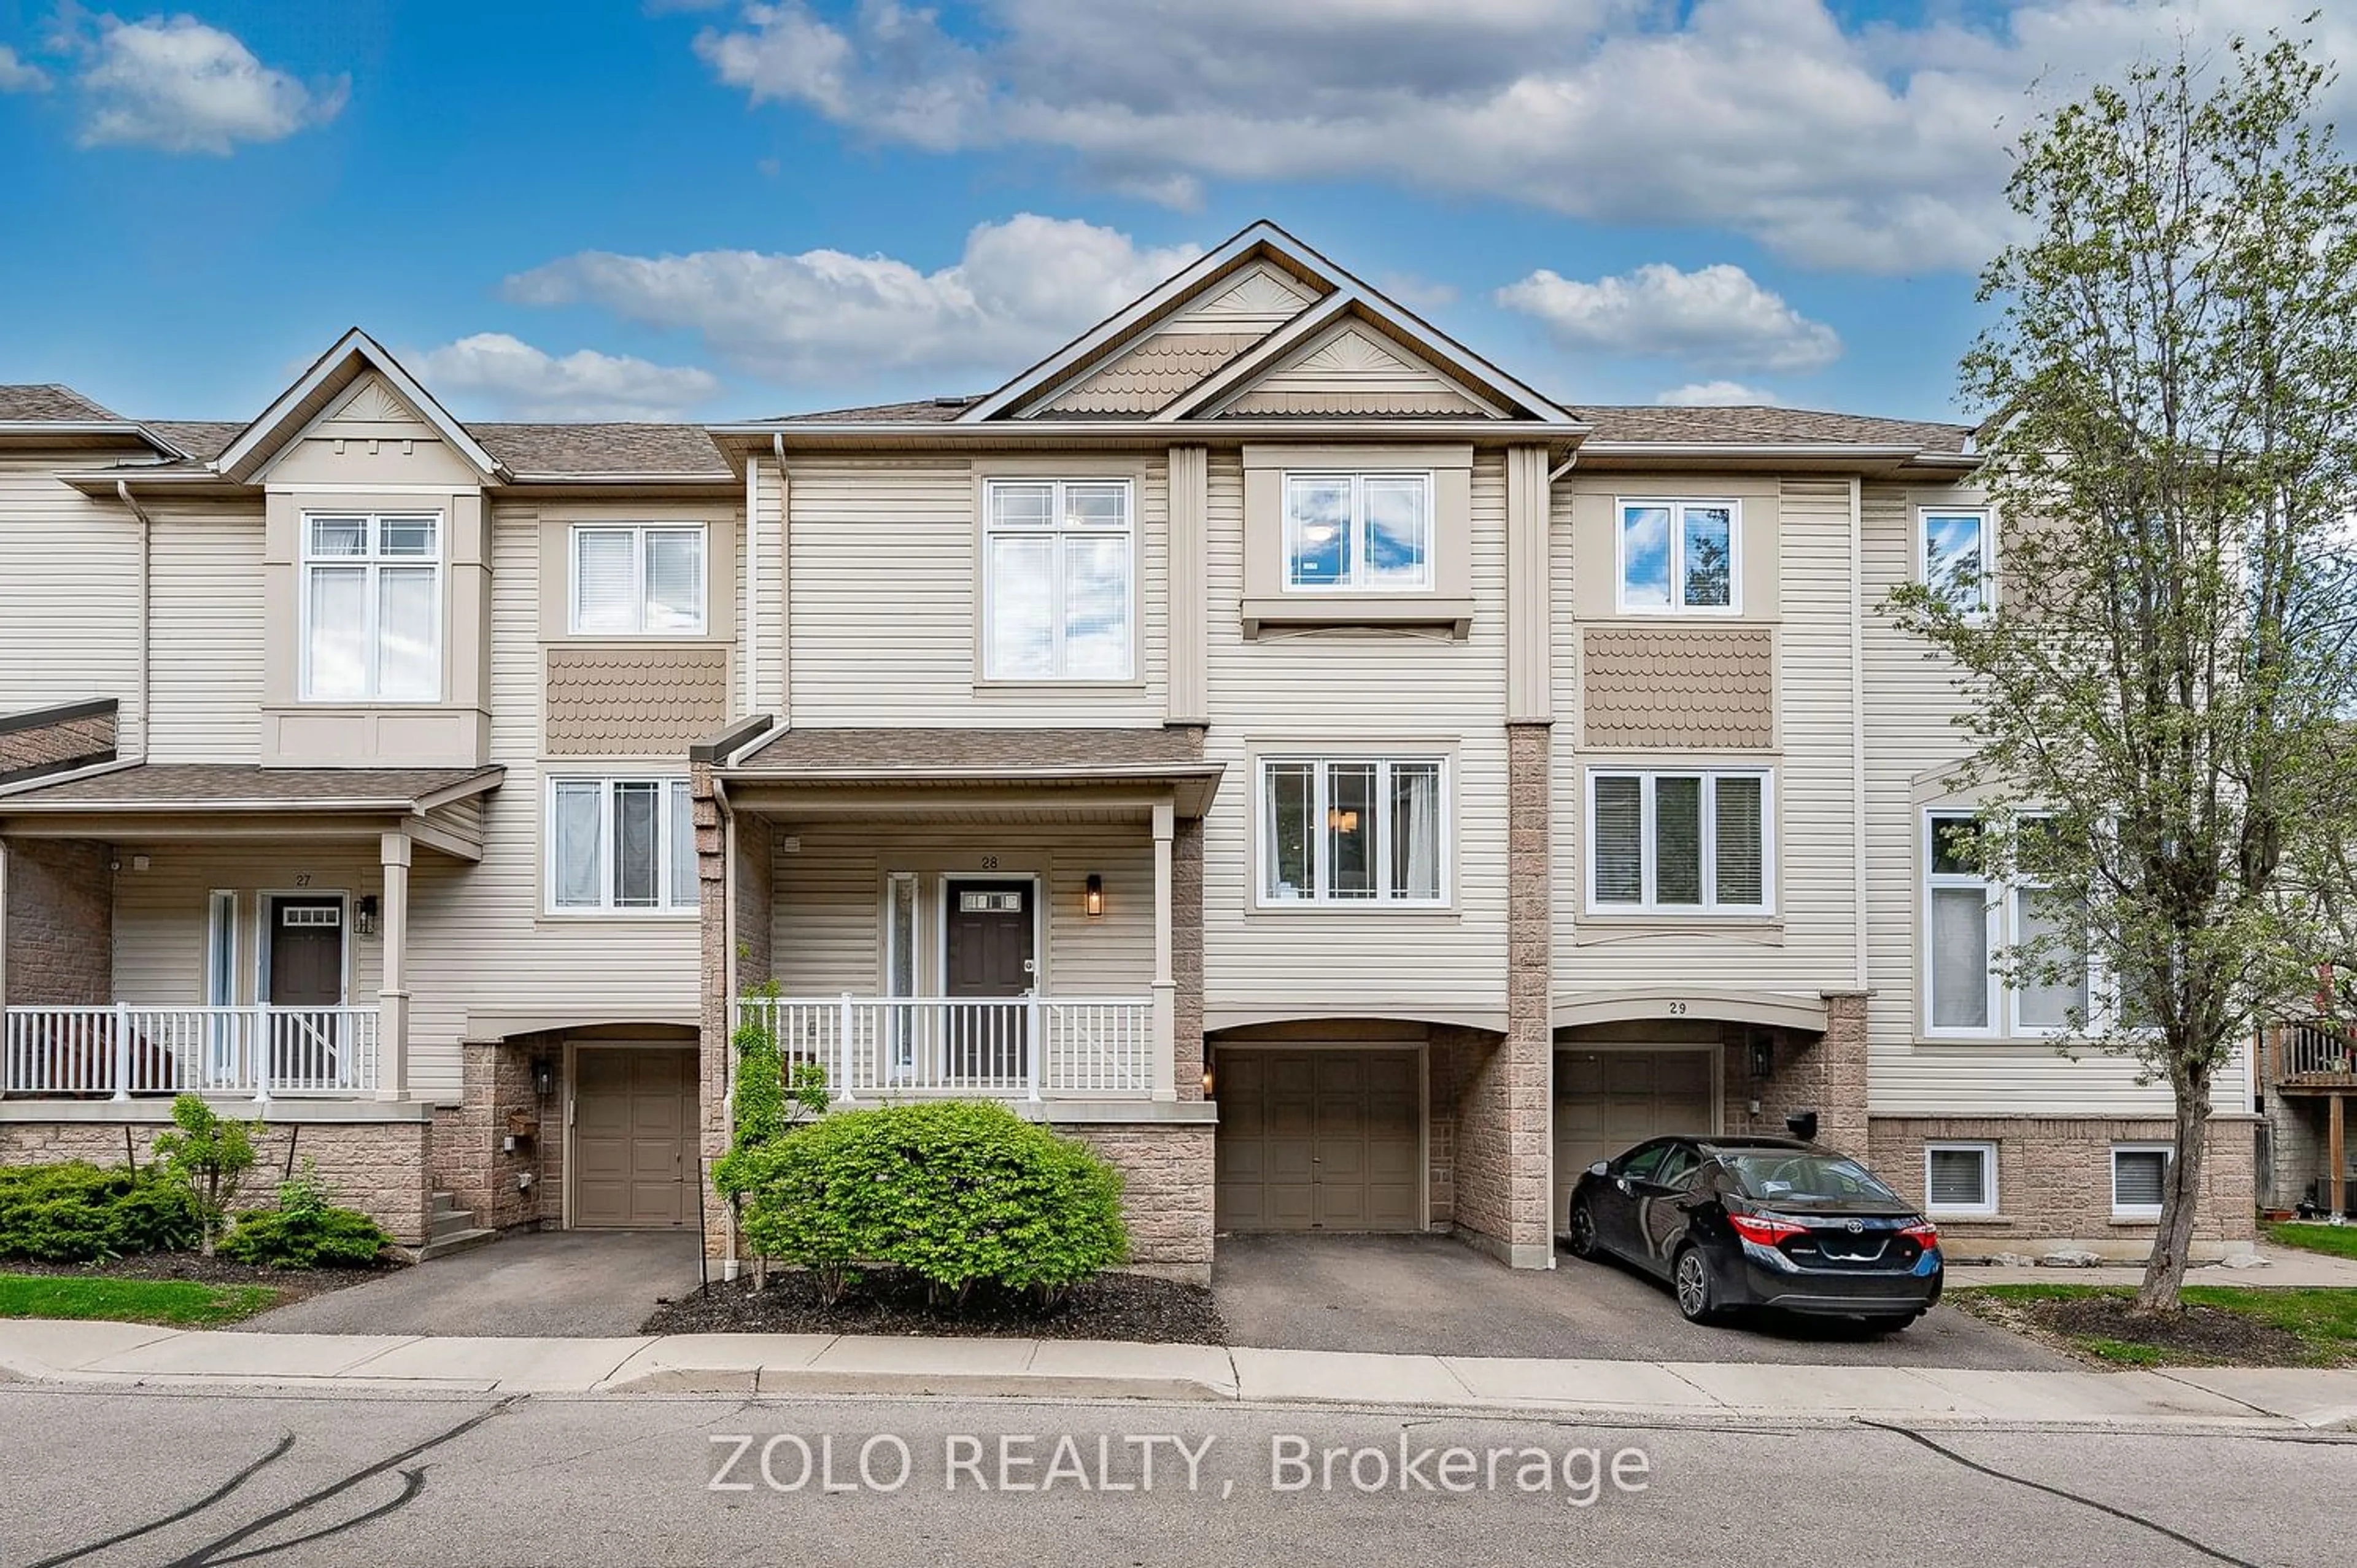 A pic from exterior of the house or condo for 7101 Branigan Gate #28, Mississauga Ontario L5N 7S2